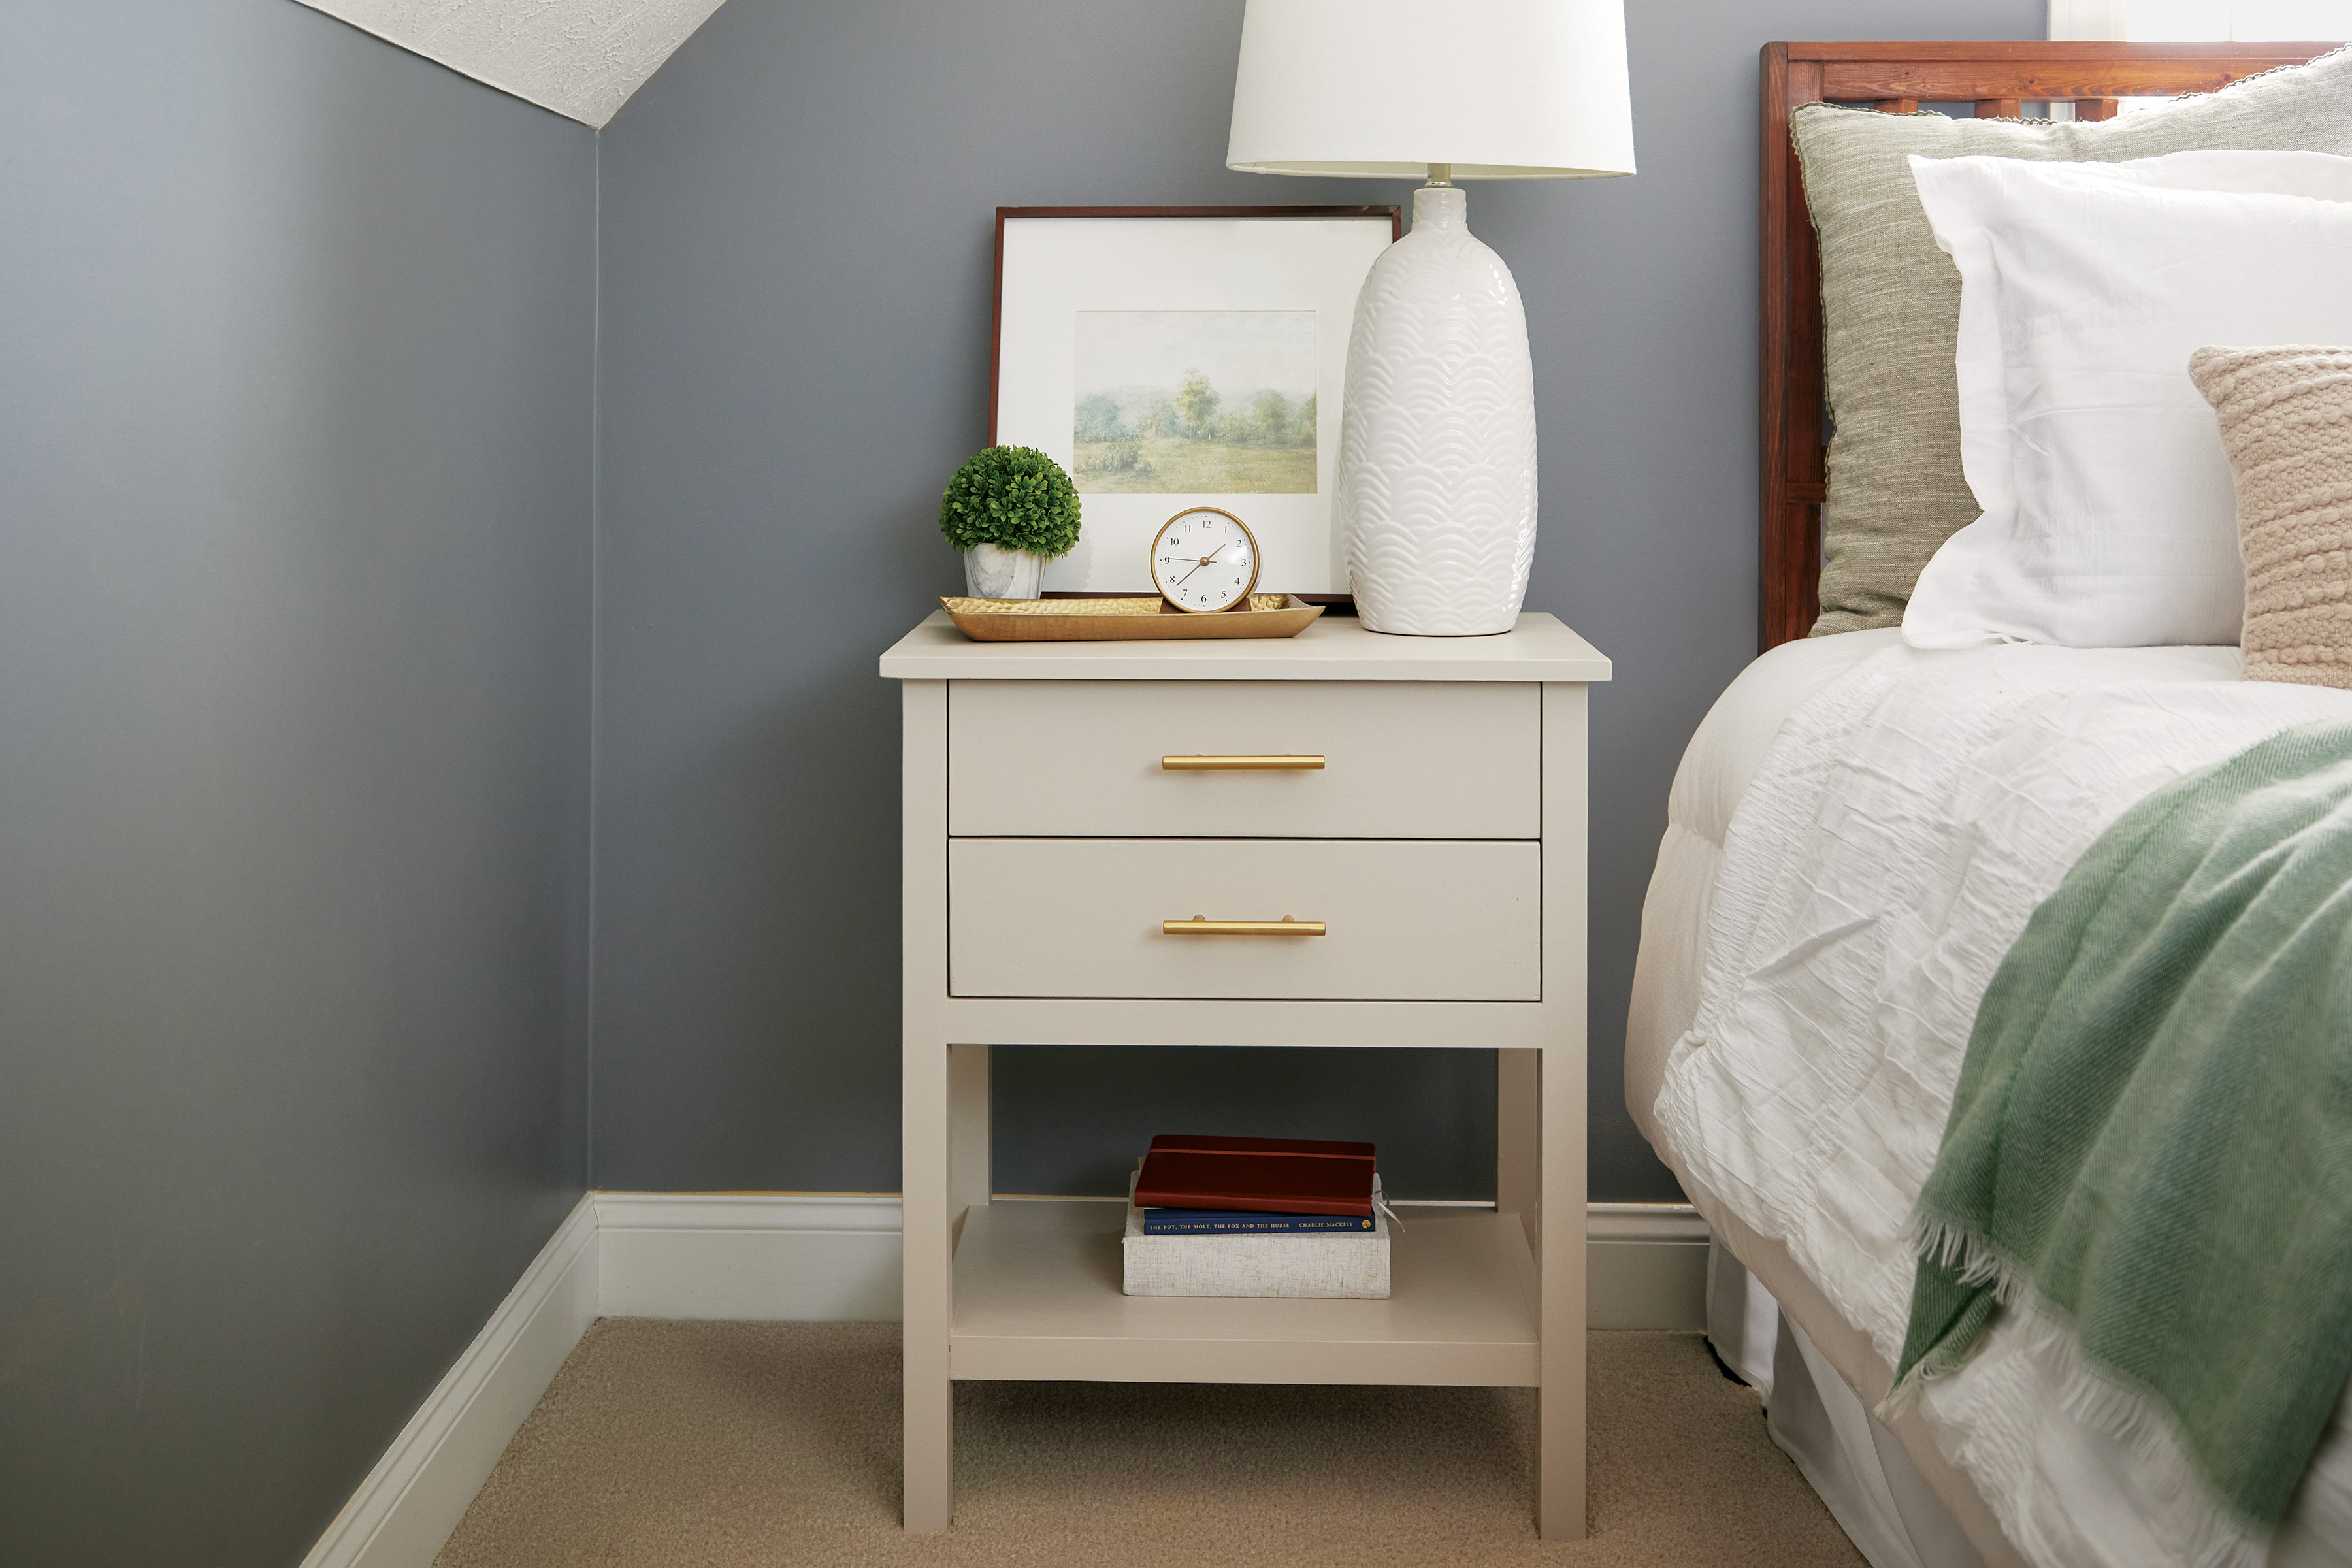 A nightstand in a bedroom.